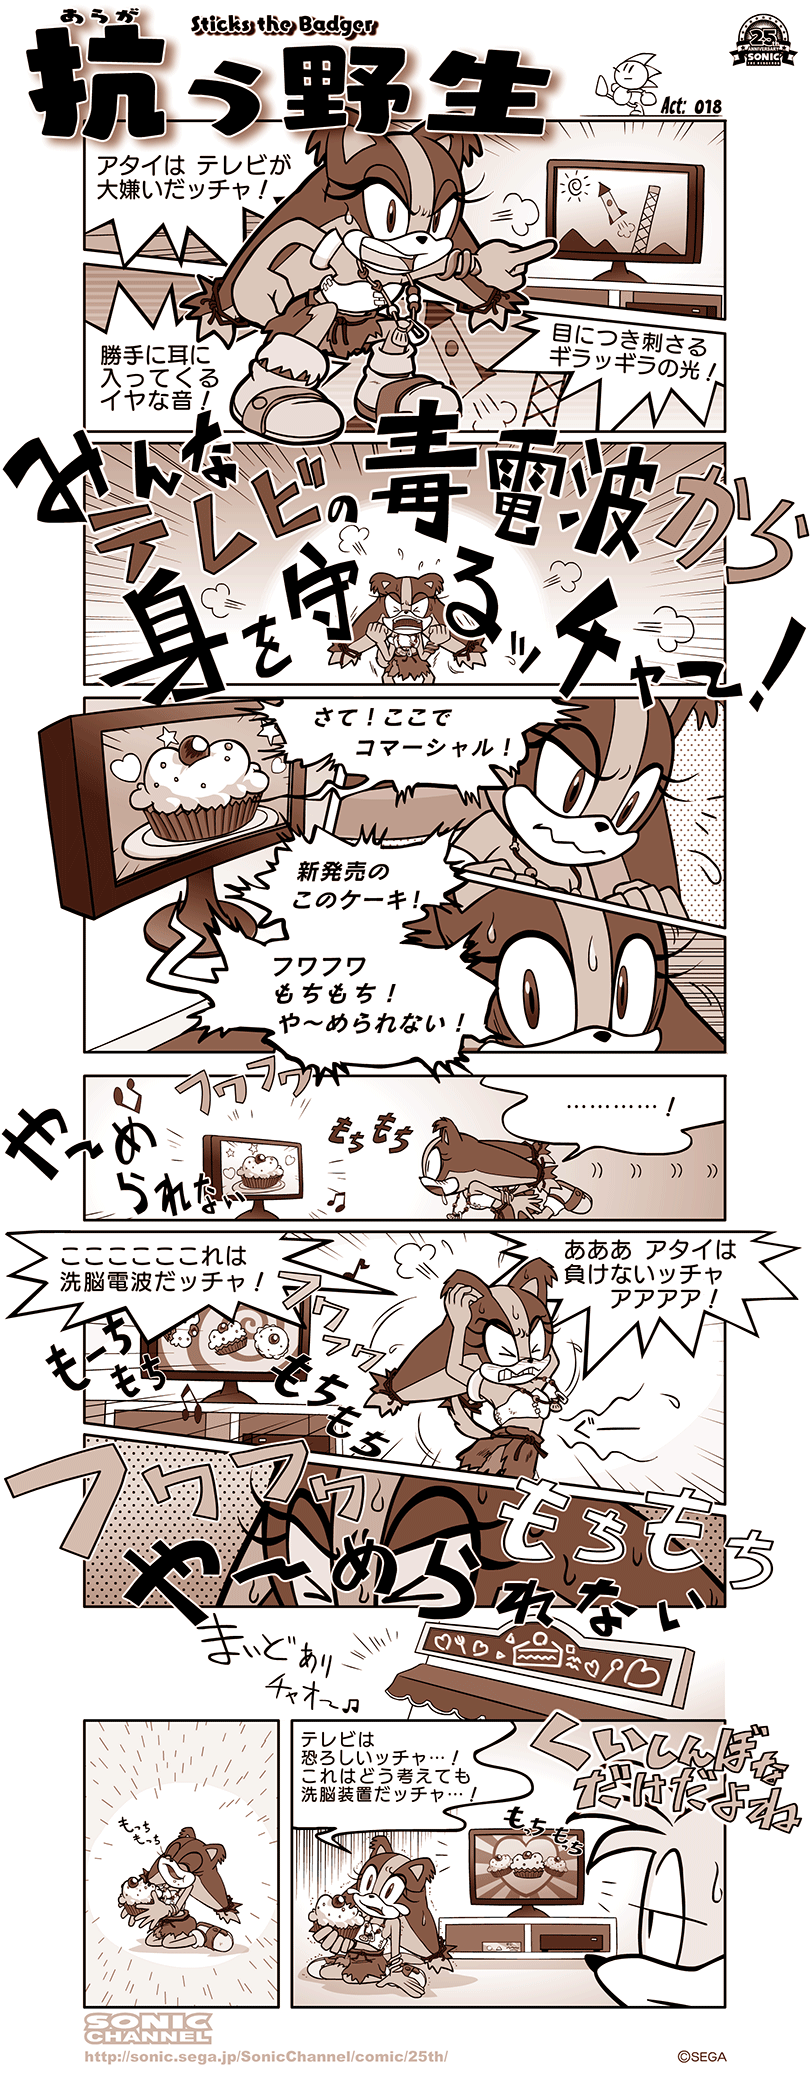 comic commentary cupcake desert eating food furry highres official_art pointing shouting sonic_the_hedgehog sticks_the_badger sweatdrop tails_(sonic) television translation_request